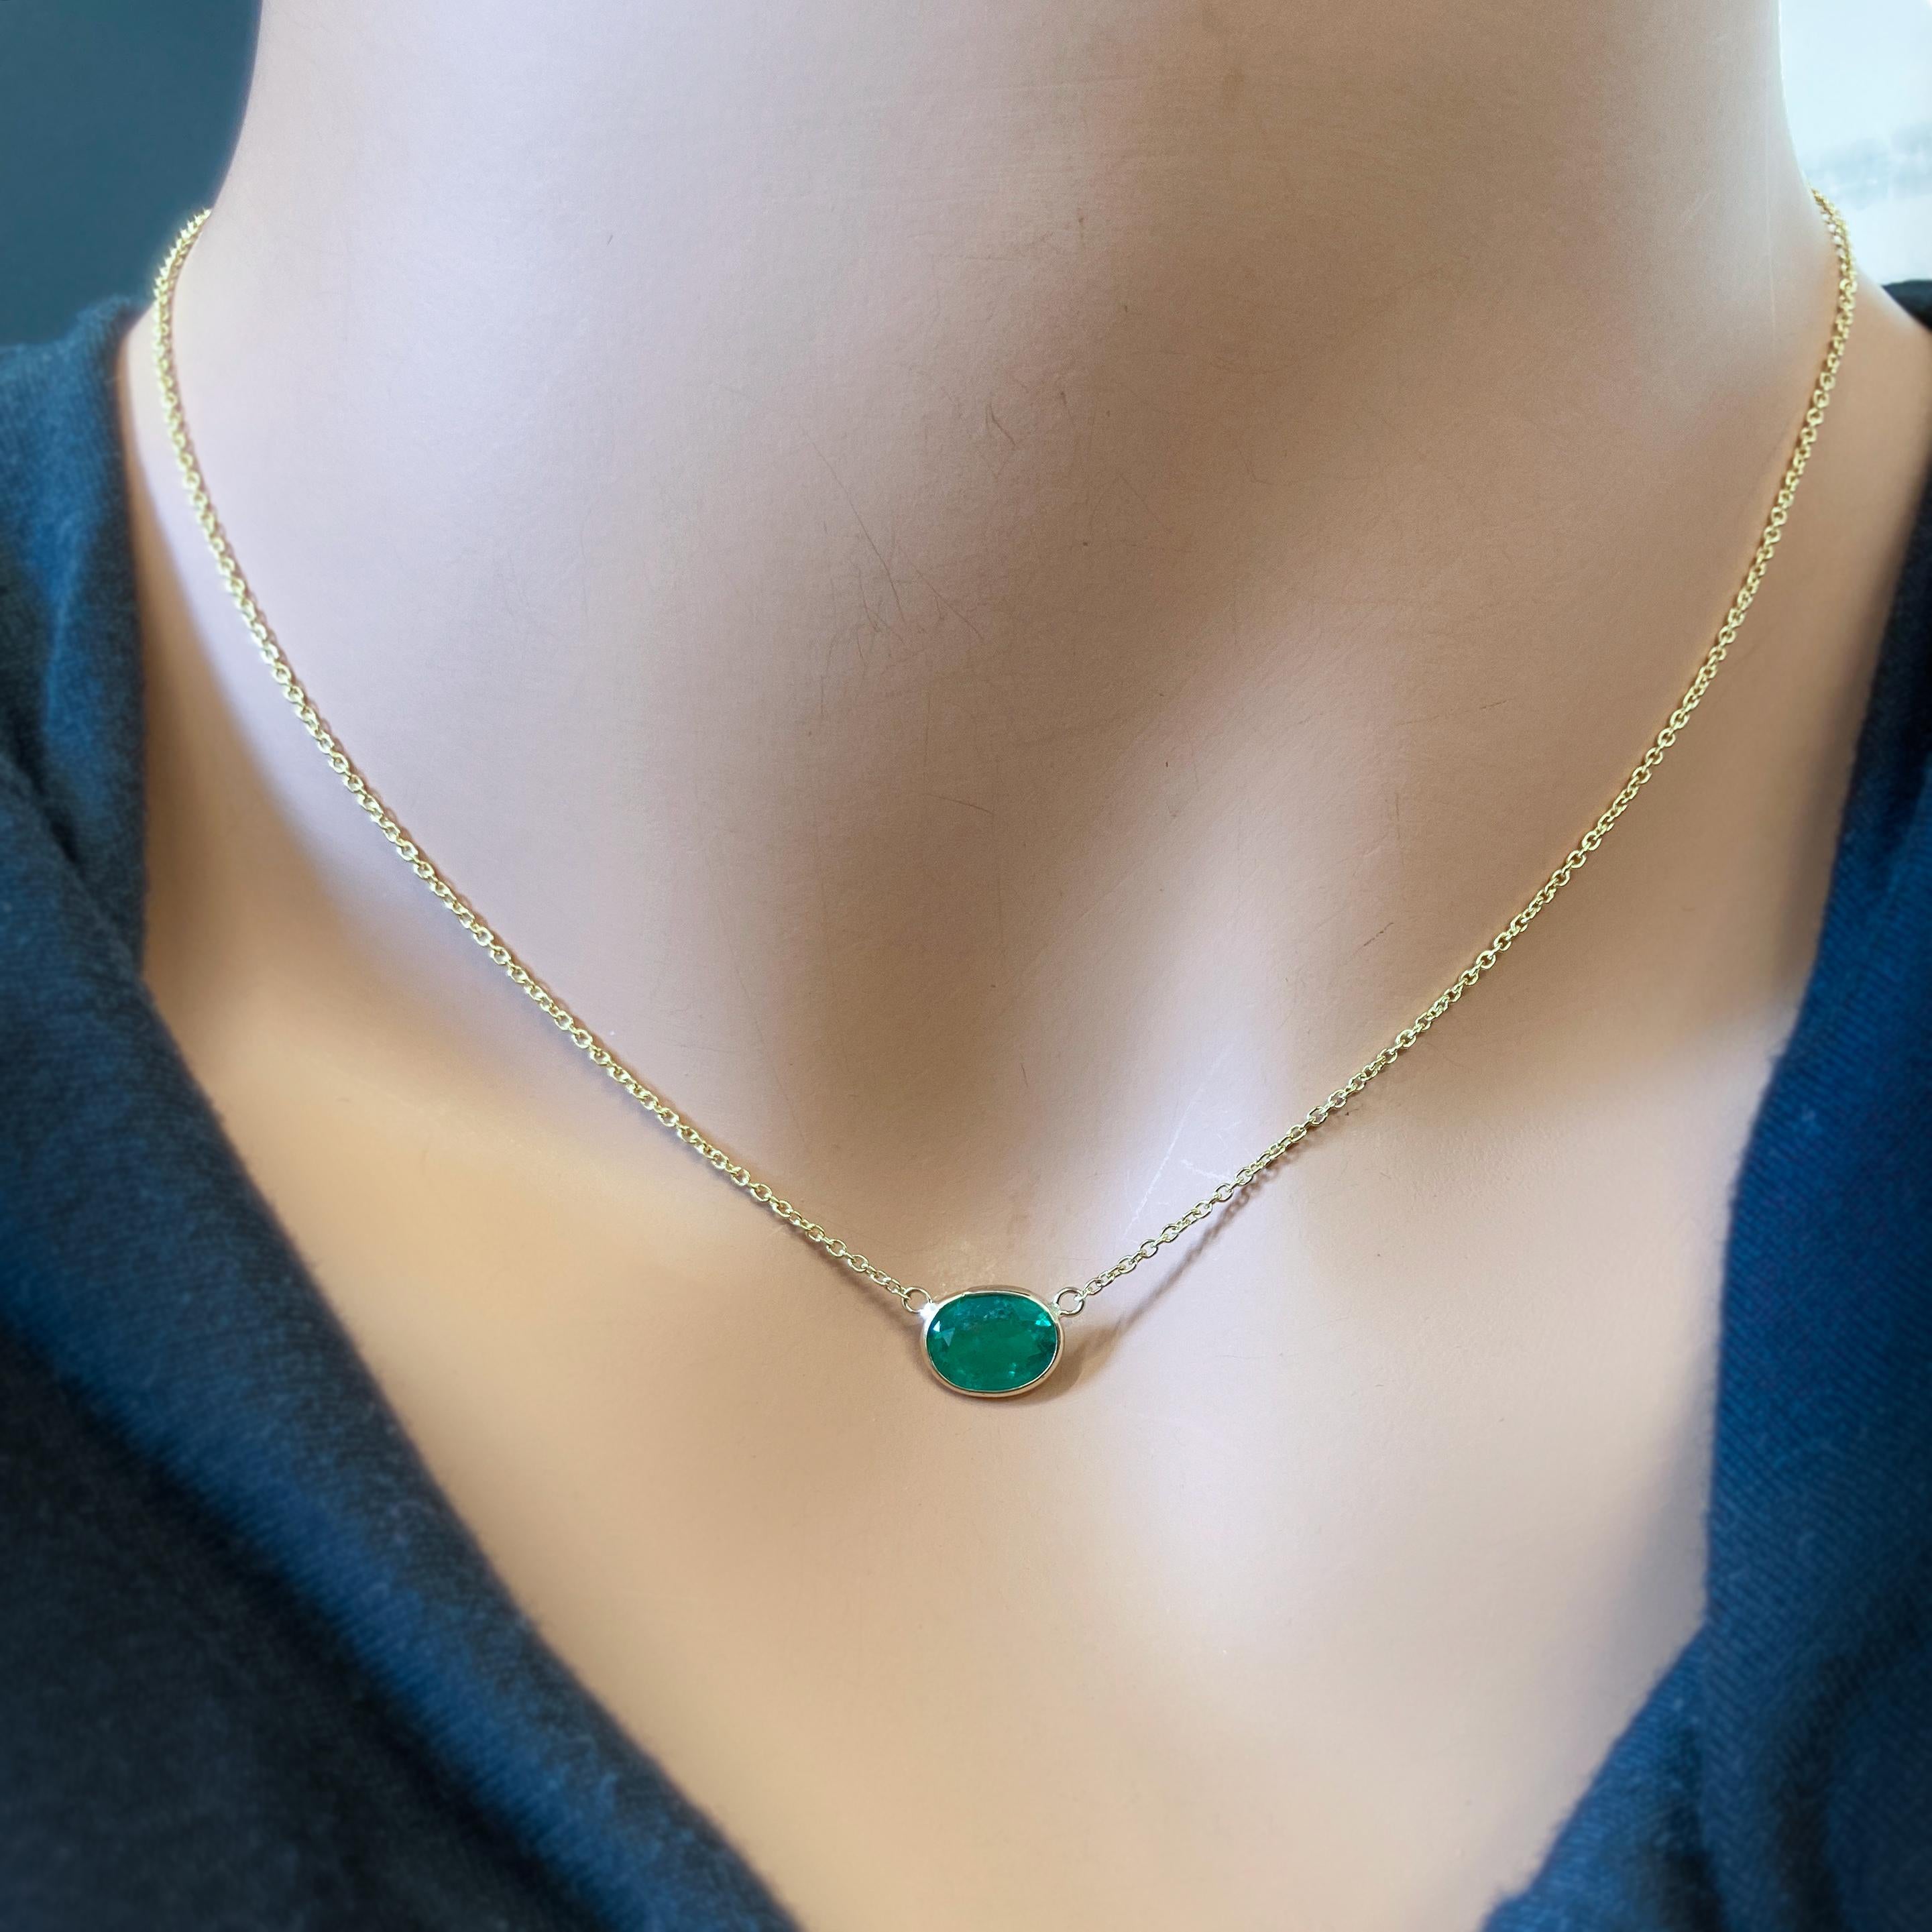 Contemporary 1.92 Carat Green Emerald Pear Shape Fashion Necklaces In 14K Yellow Gold For Sale